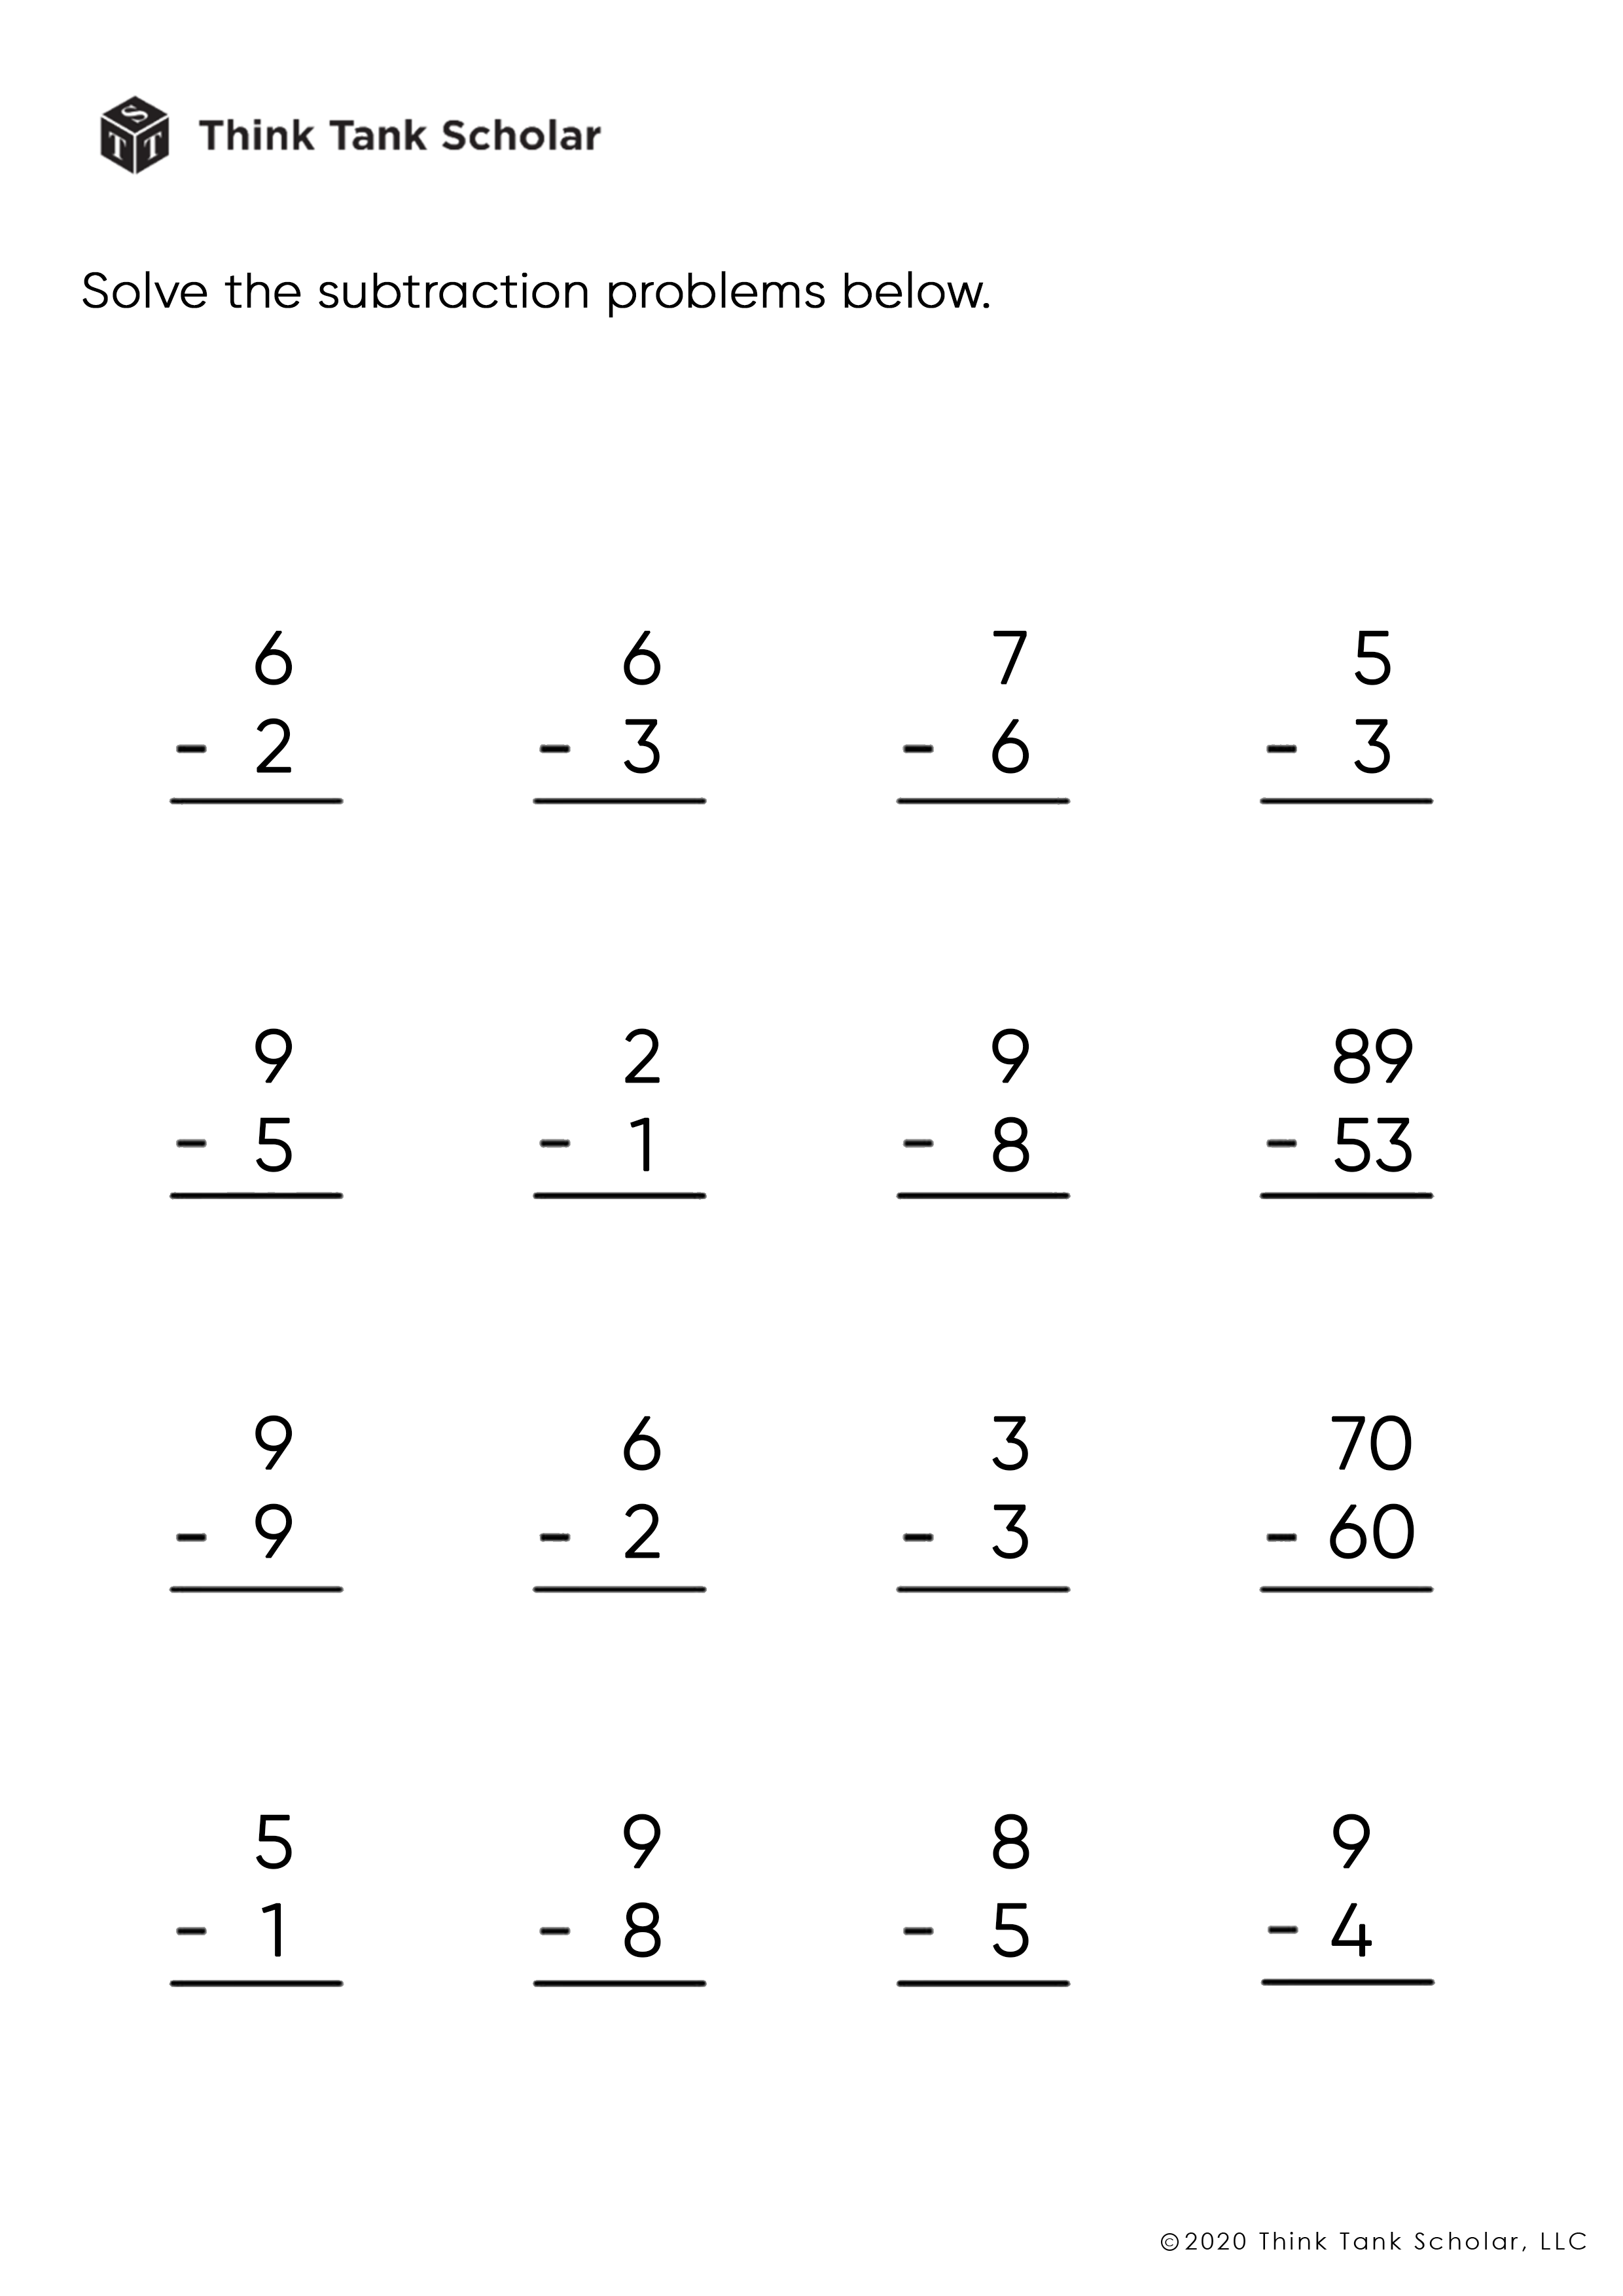 subtraction-worksheets-exercises-printable-pdf-free-think-tank-scholar